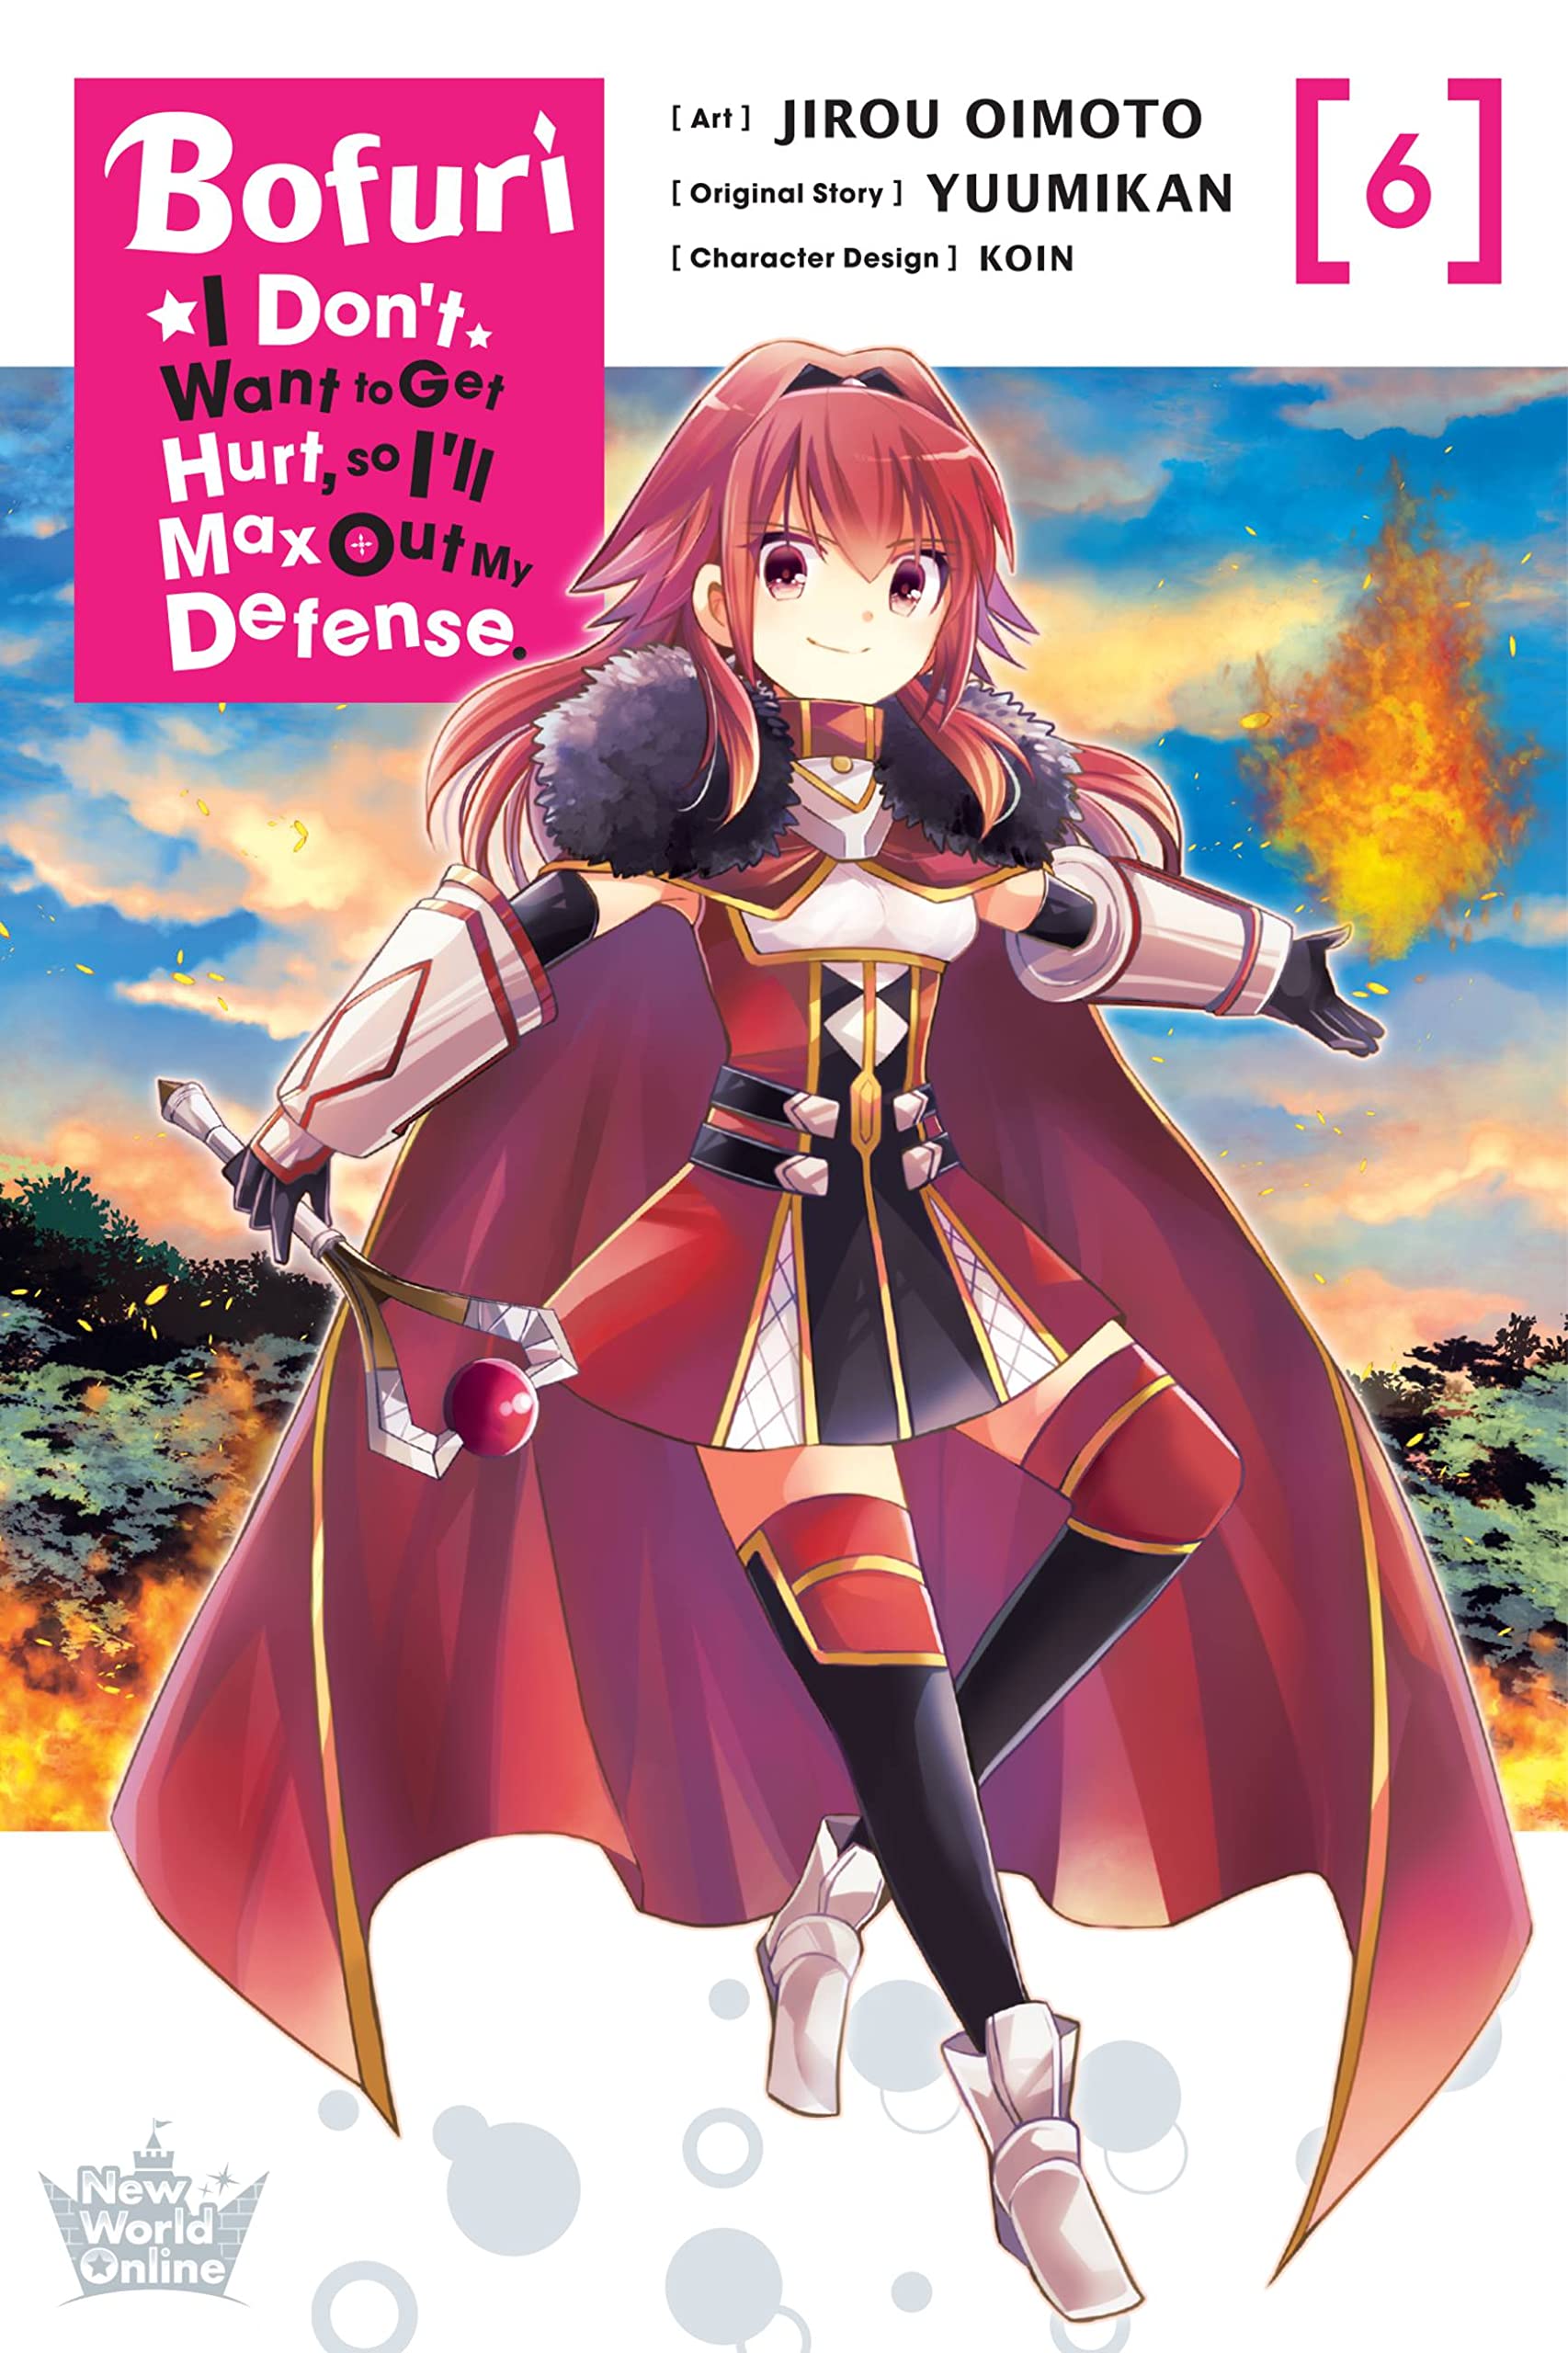 bofuri:-i-don’t-want-to-get-hurt,-so-i’ll-max-out-my-defense.-volume-6-review-–-theoasg